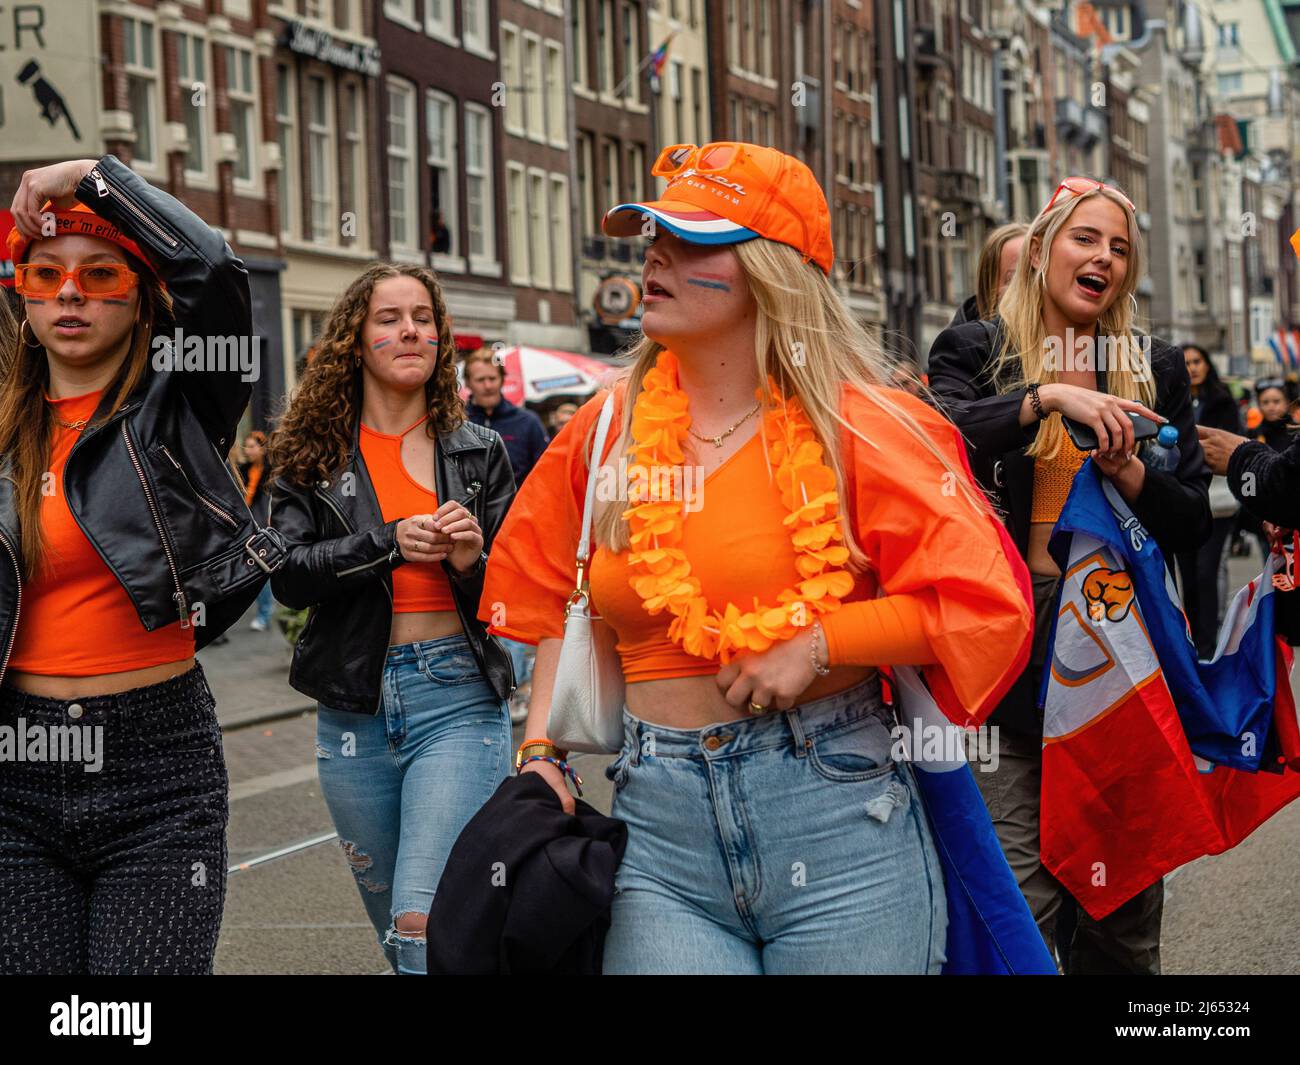 A group of women wearing orange clothes seen walking on the streets of the  city. After two years of restrictions, this year's King's Day celebrations  went back to normal. King's Day is